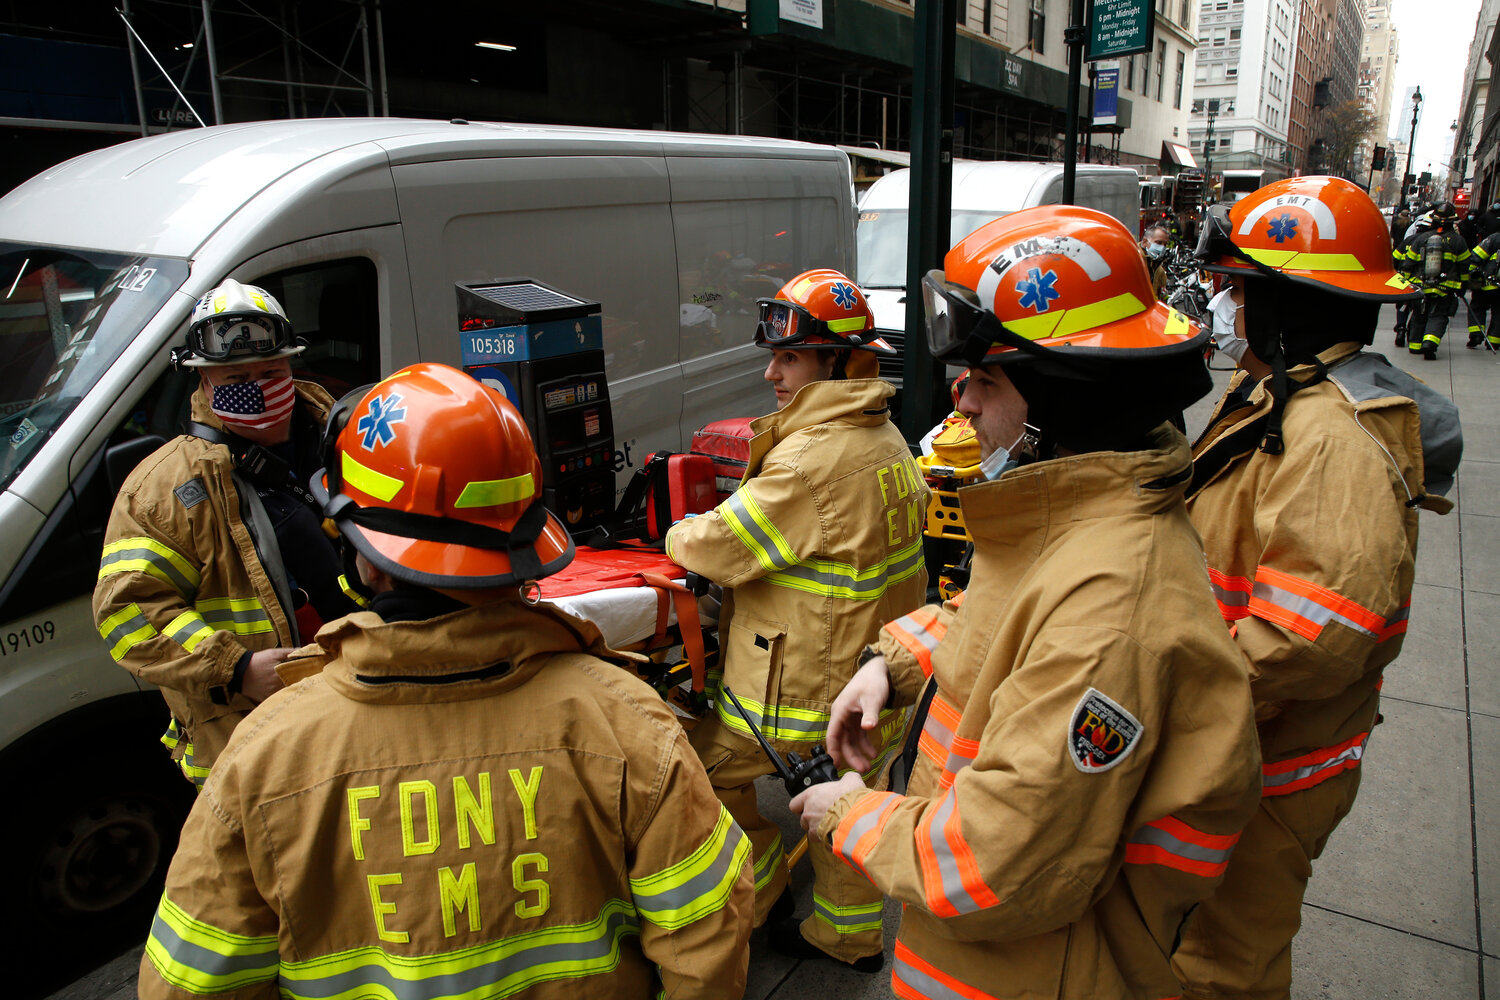 FDNY EMS personnel standby for orders during a car fire at a Midtown parking garage.  Leadership of two EMS unions are divided over a call by members for the city to grant a one-time exemption for EMS workers who aged out of eligibility in the last three years to take the firefighter promotional exam being offered in October.